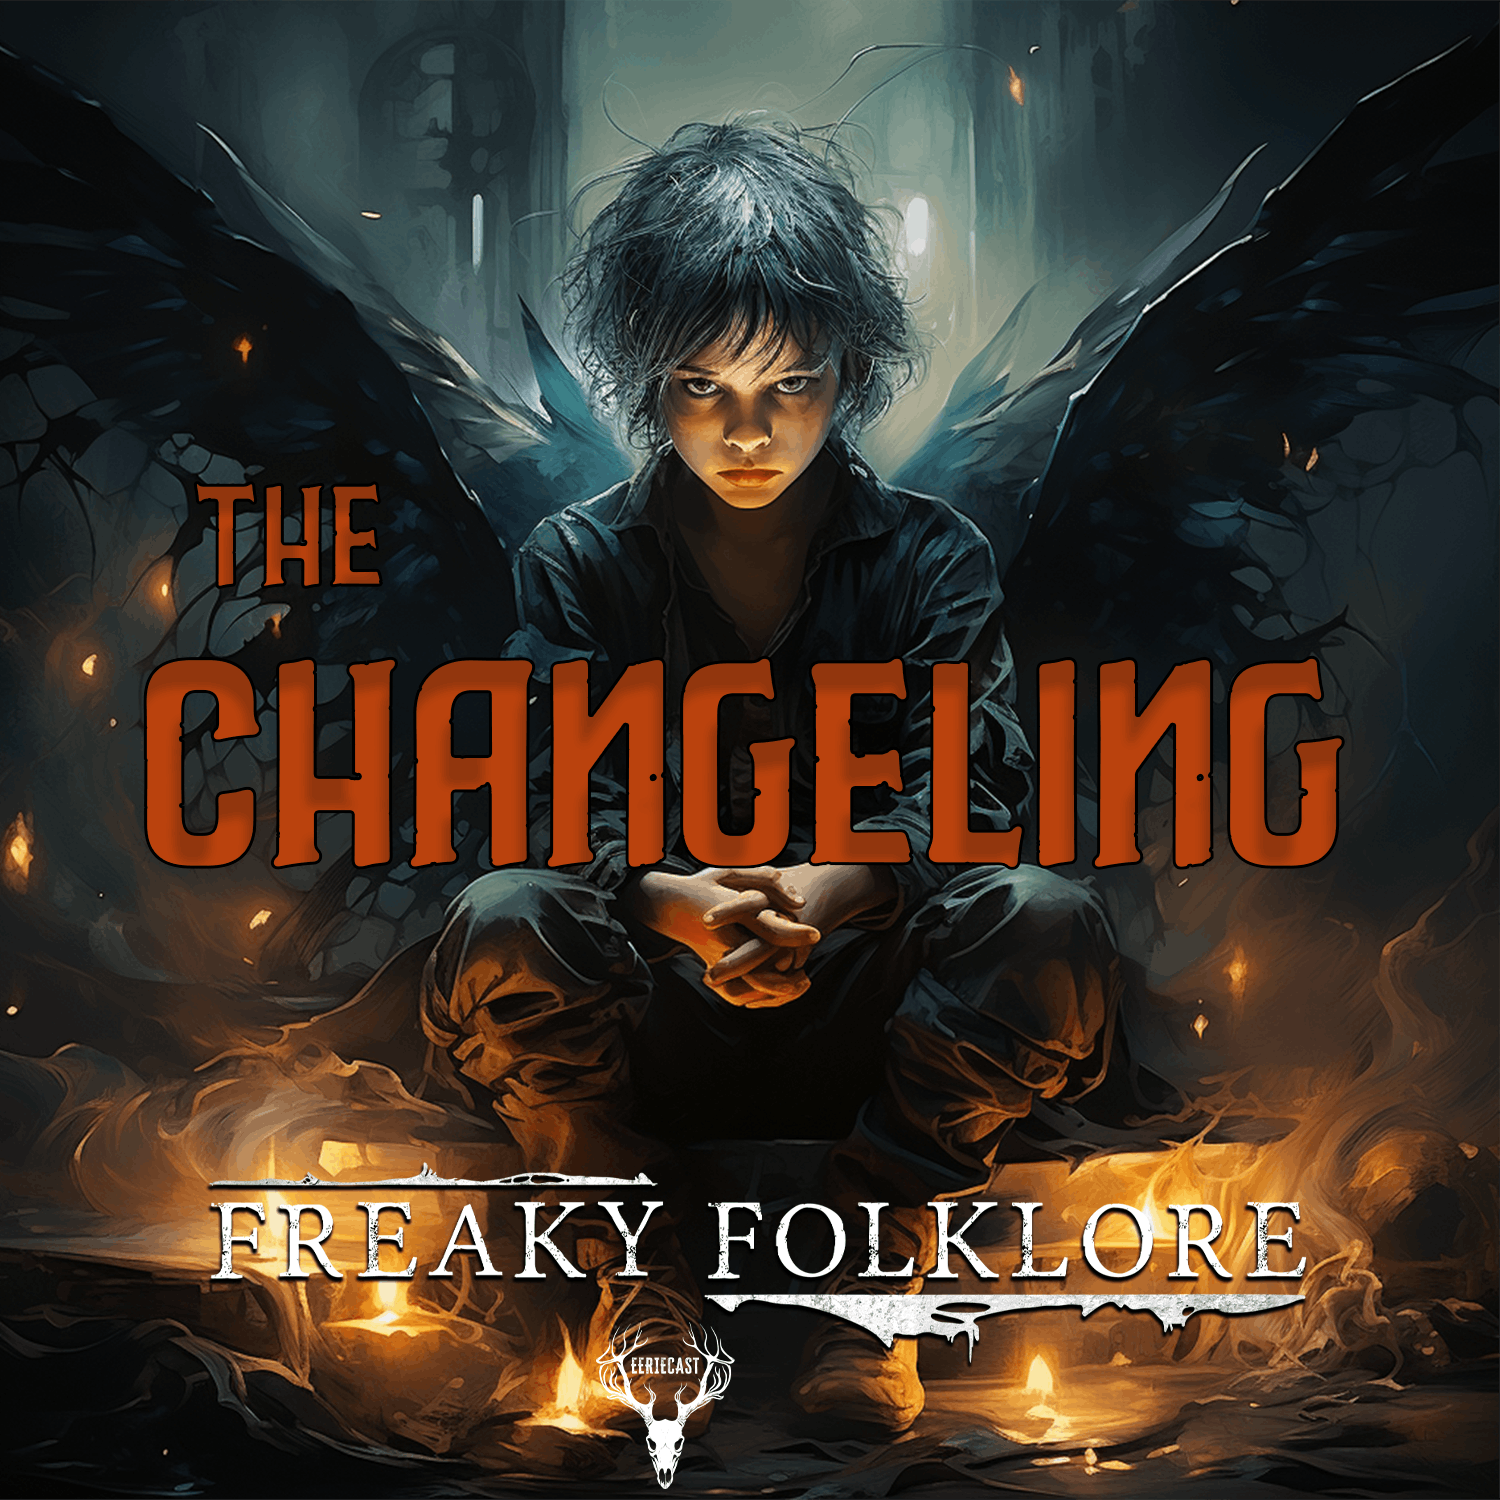 THE CHANGELING - It Wants to Replace Your Children